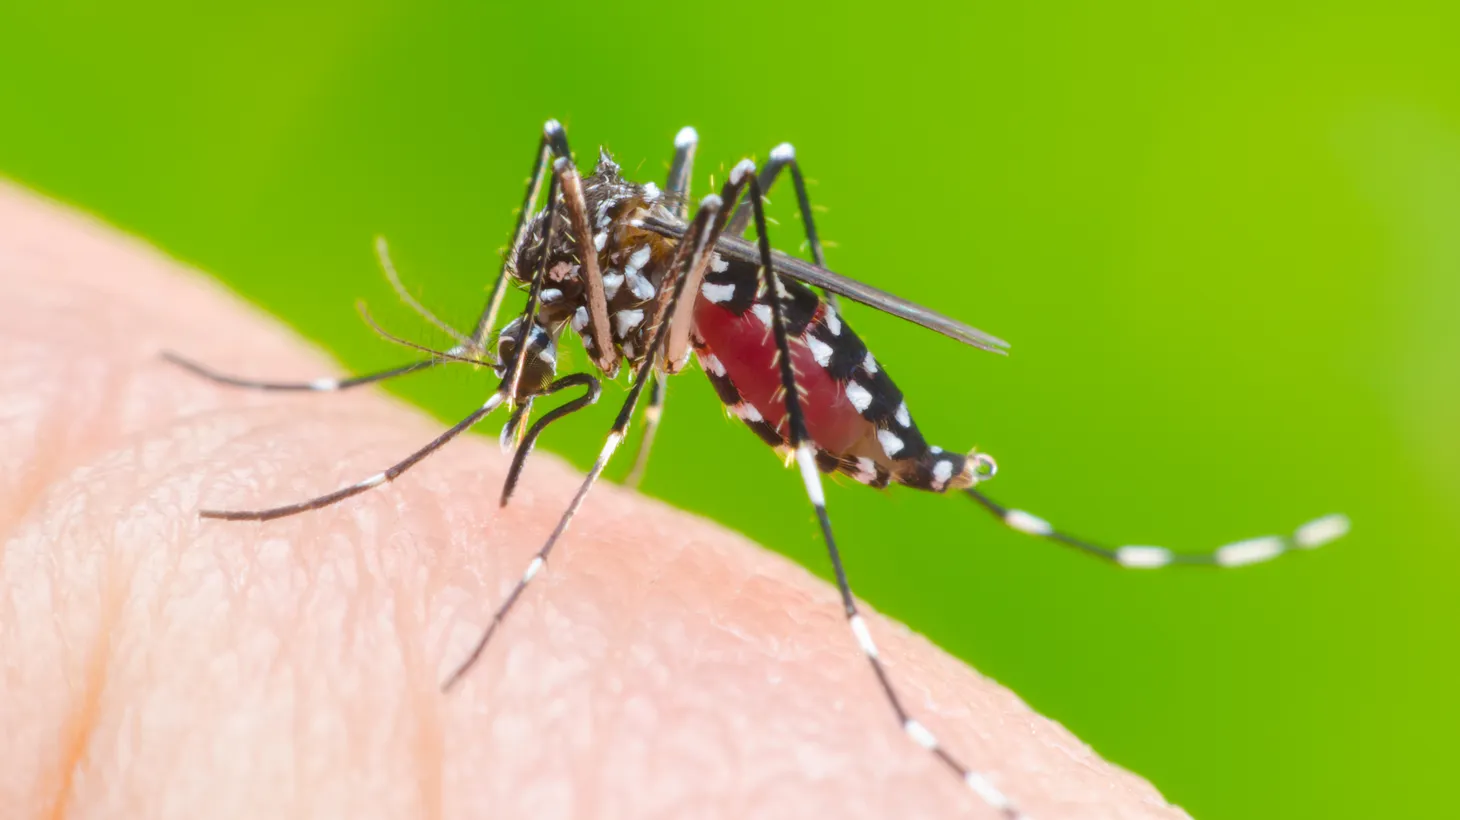 The Aedes aegypti mosquito is an aggressive ankle biter and arrived in LA a decade ago.